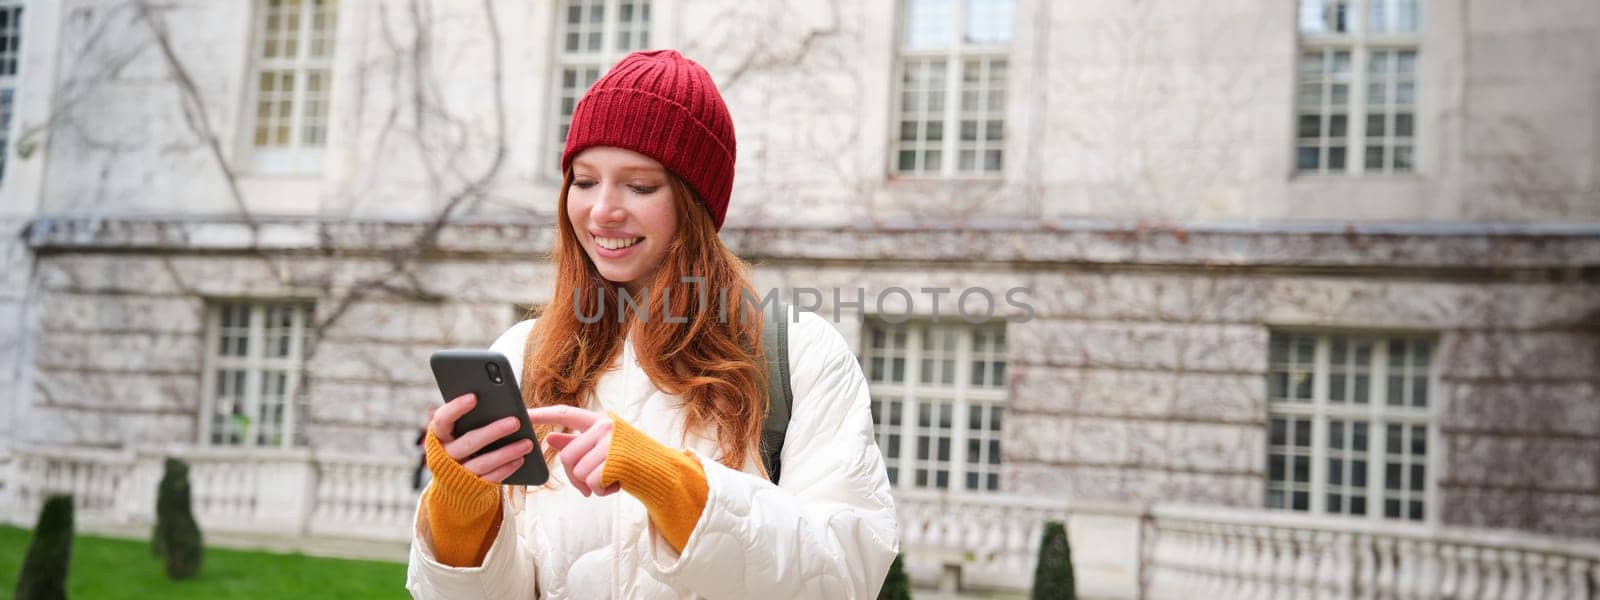 Portrait of young redhead woman looking at her mobile phone, checks her location on smartphone app, walking around city attractions.